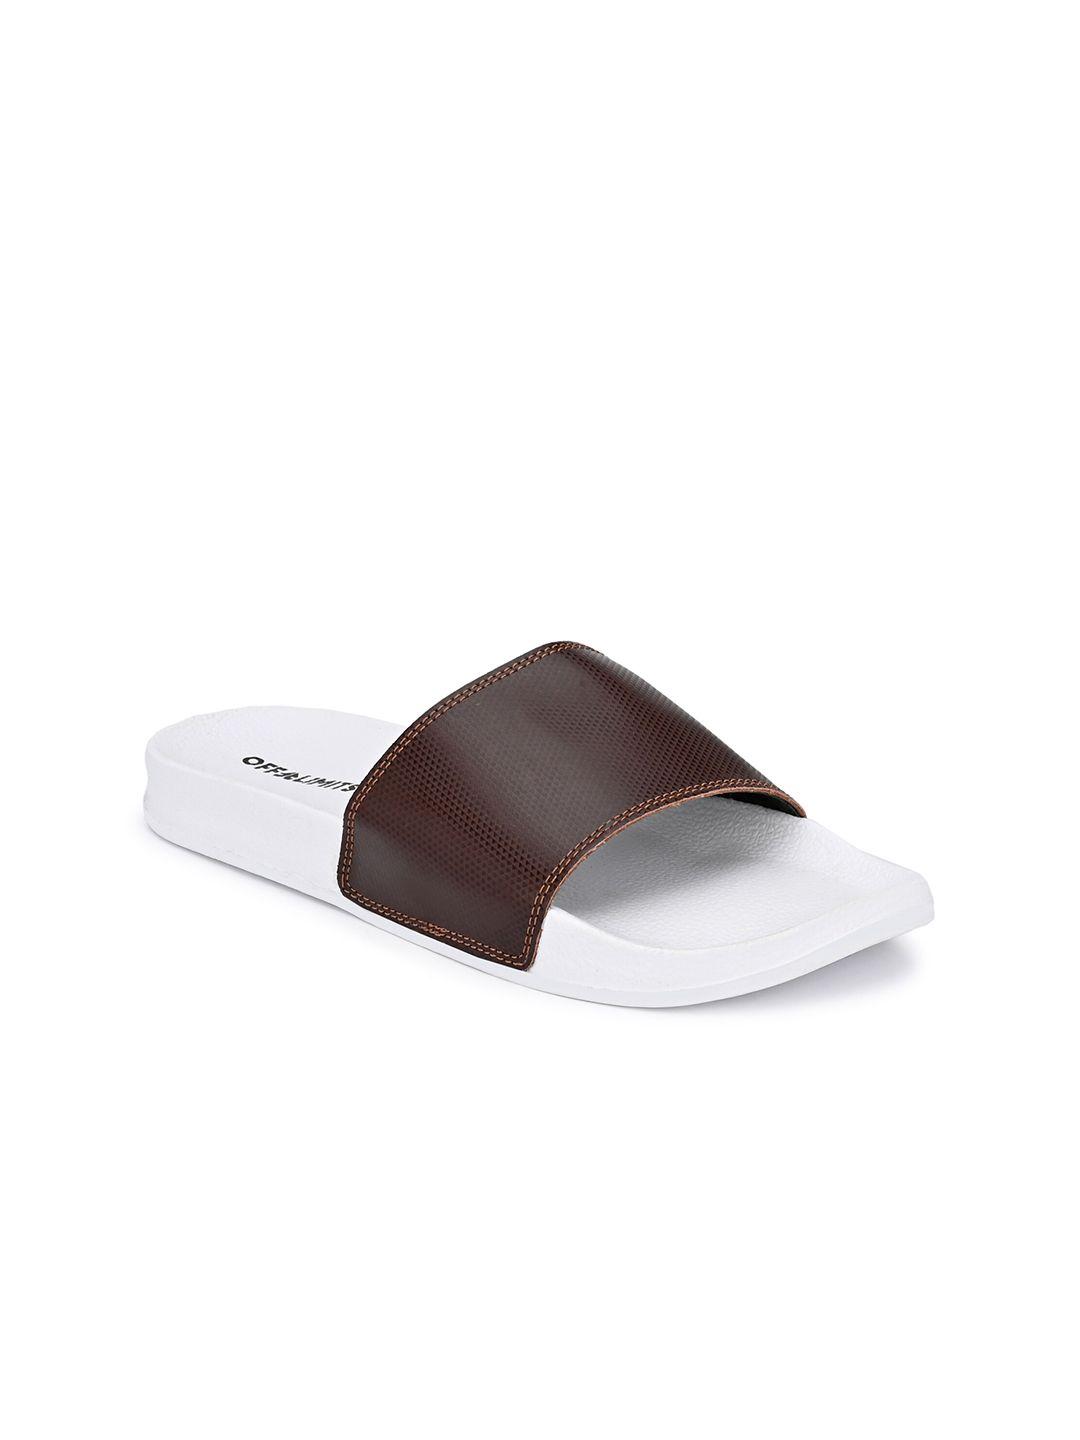 off limits men brown & white sliders